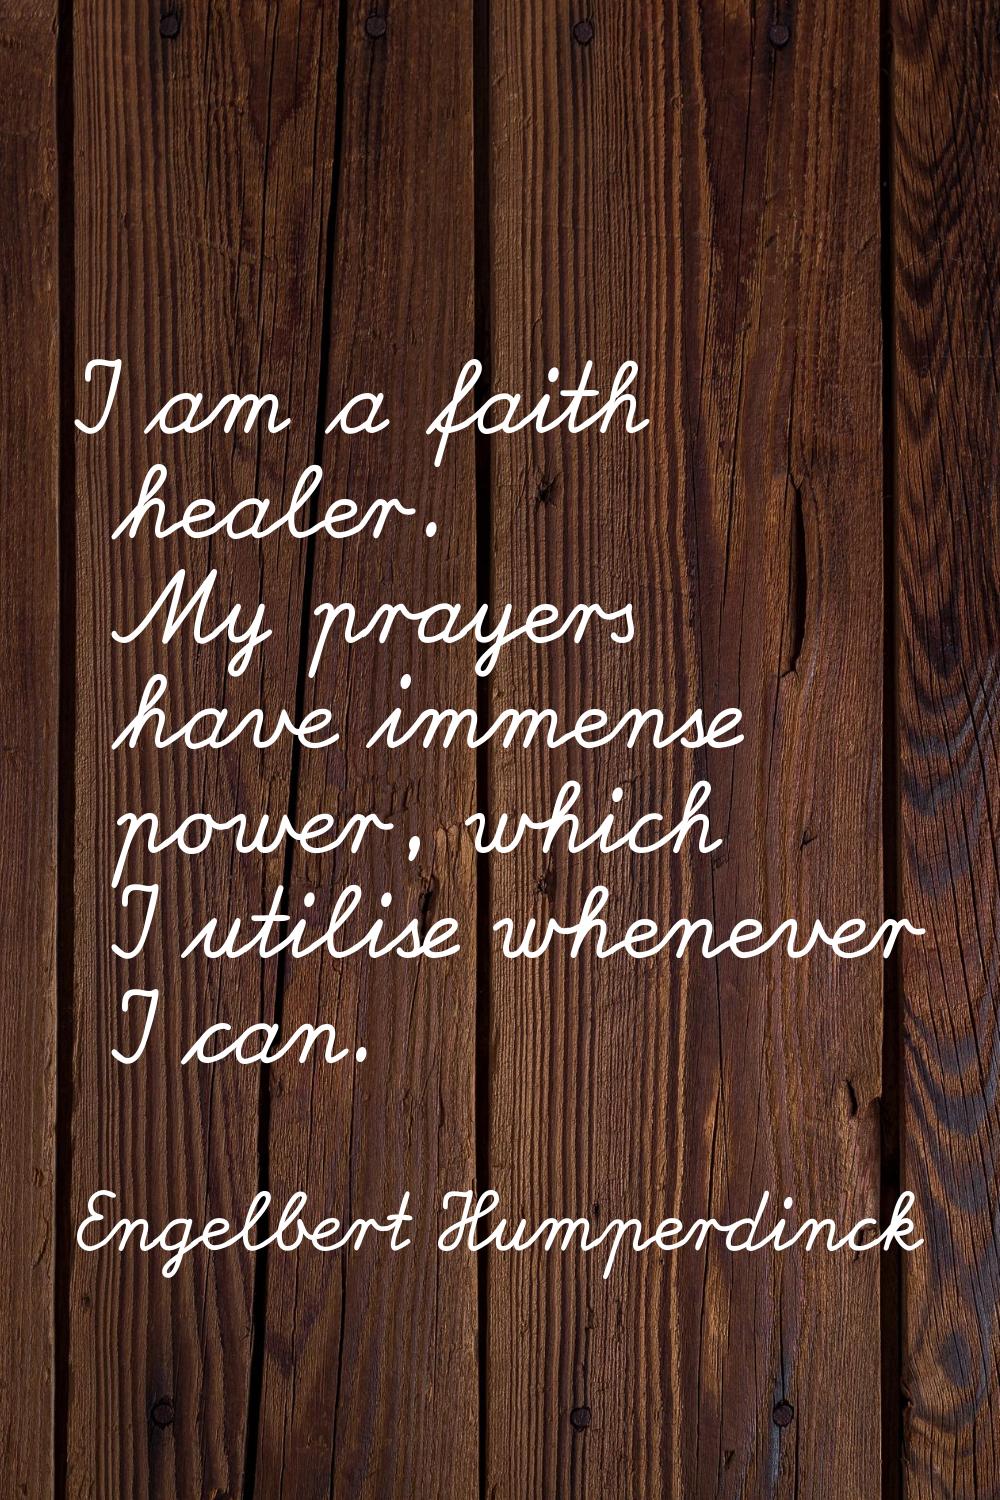 I am a faith healer. My prayers have immense power, which I utilise whenever I can.